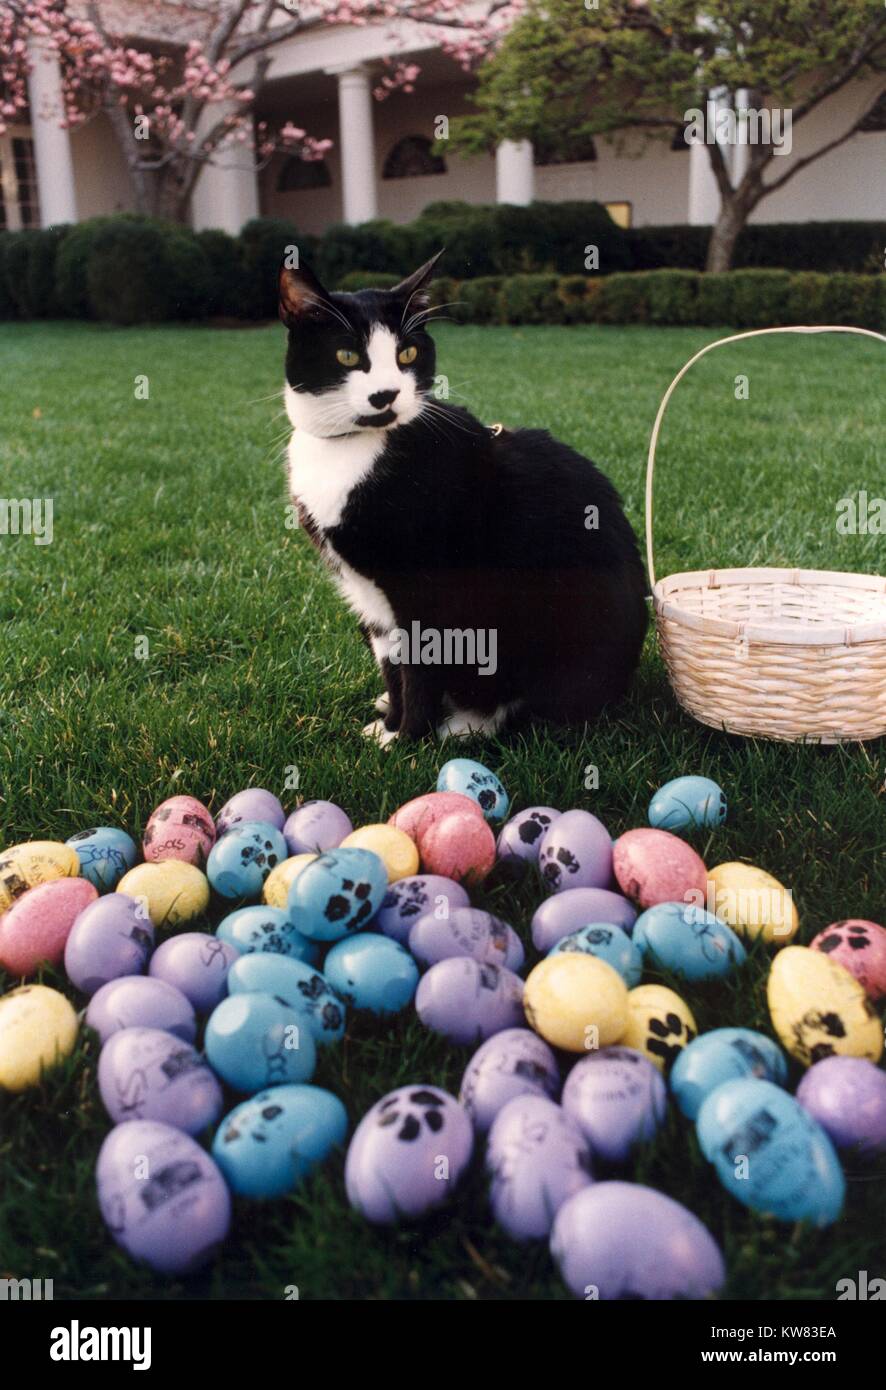 Socks the Cat, the First Pet of President Bill Clinton and First Wife Hillary Rodham Clinton, with black fur, white face, red collar, and amber eyes, standing with back arched and head turned to the side, posing next to a basket and pile of pastel Easter eggs painted with paw prints on the White House lawn, Washington, District of Columbia, April, 1994. Stock Photo